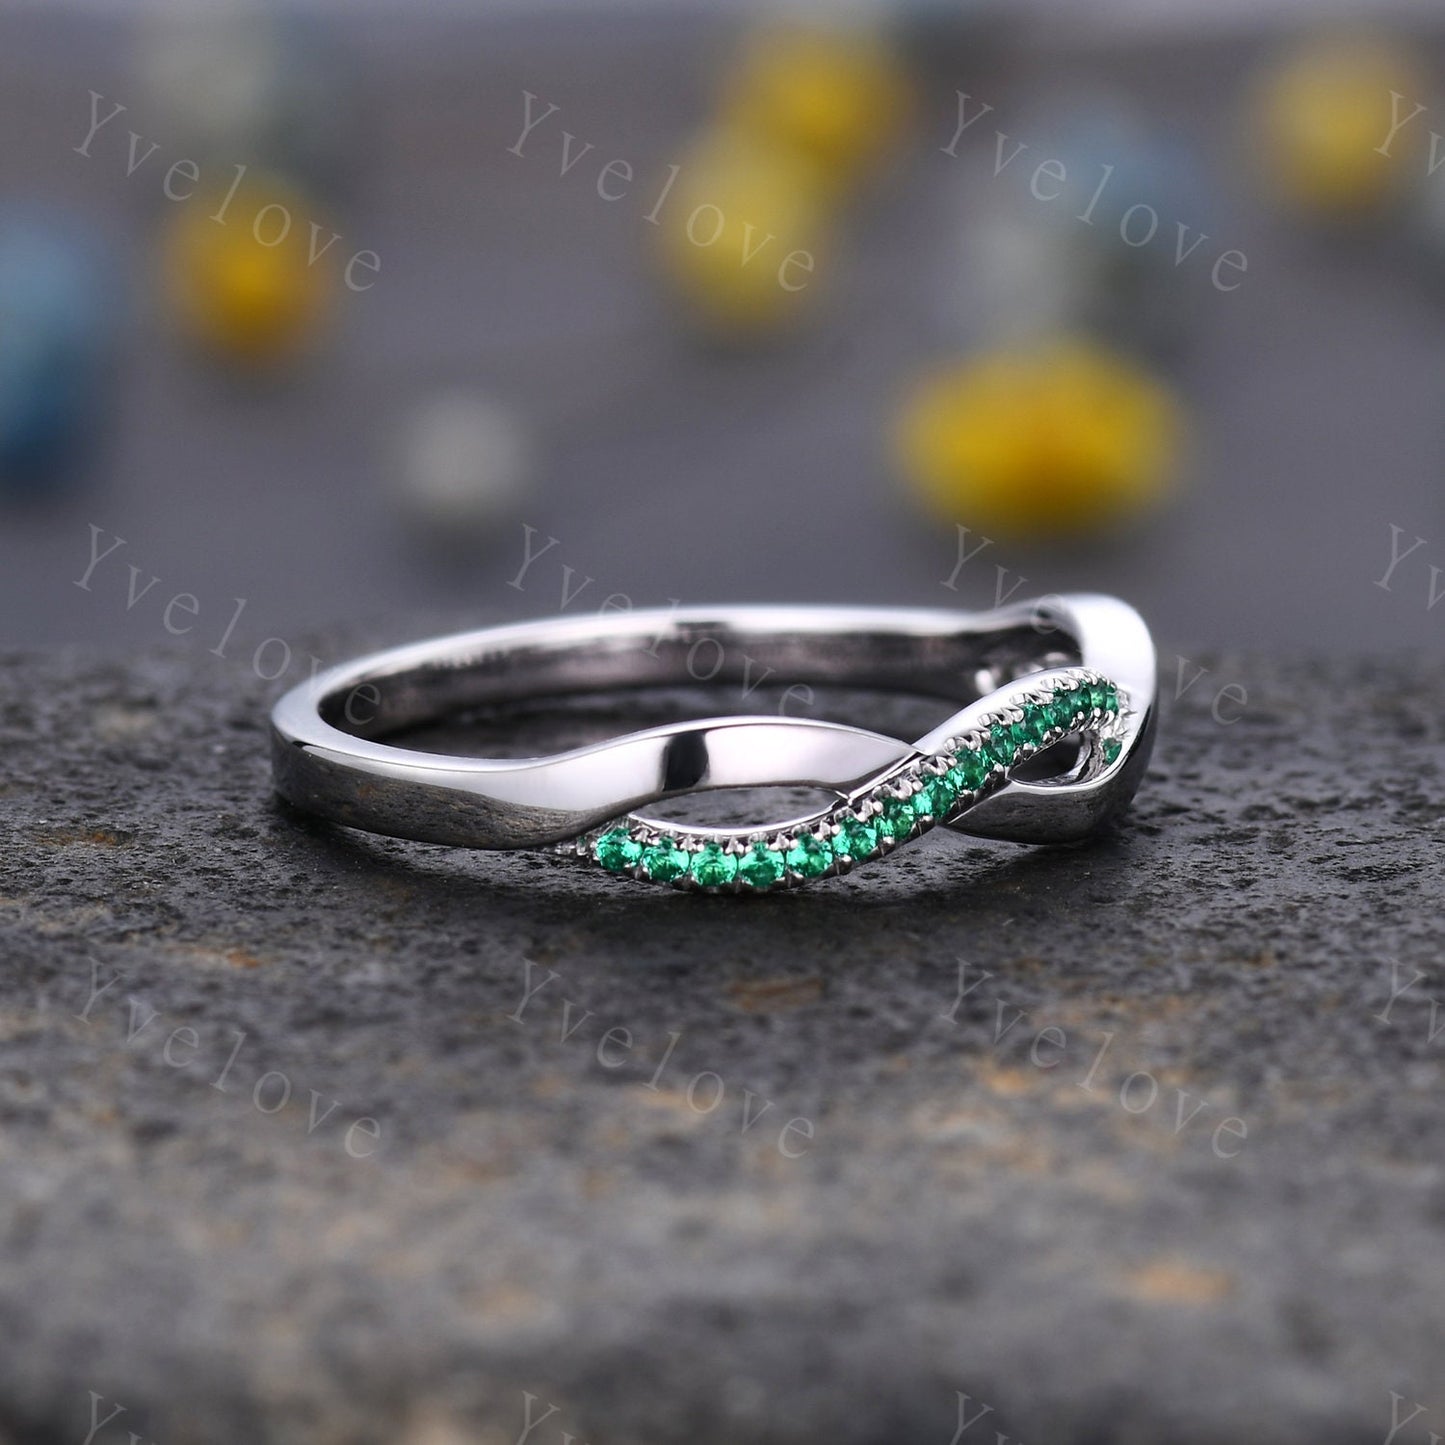 Emerald wedding band twist infinity matching wedding ring anniversary gift art deco white gold stacking band May birthstone gift for her